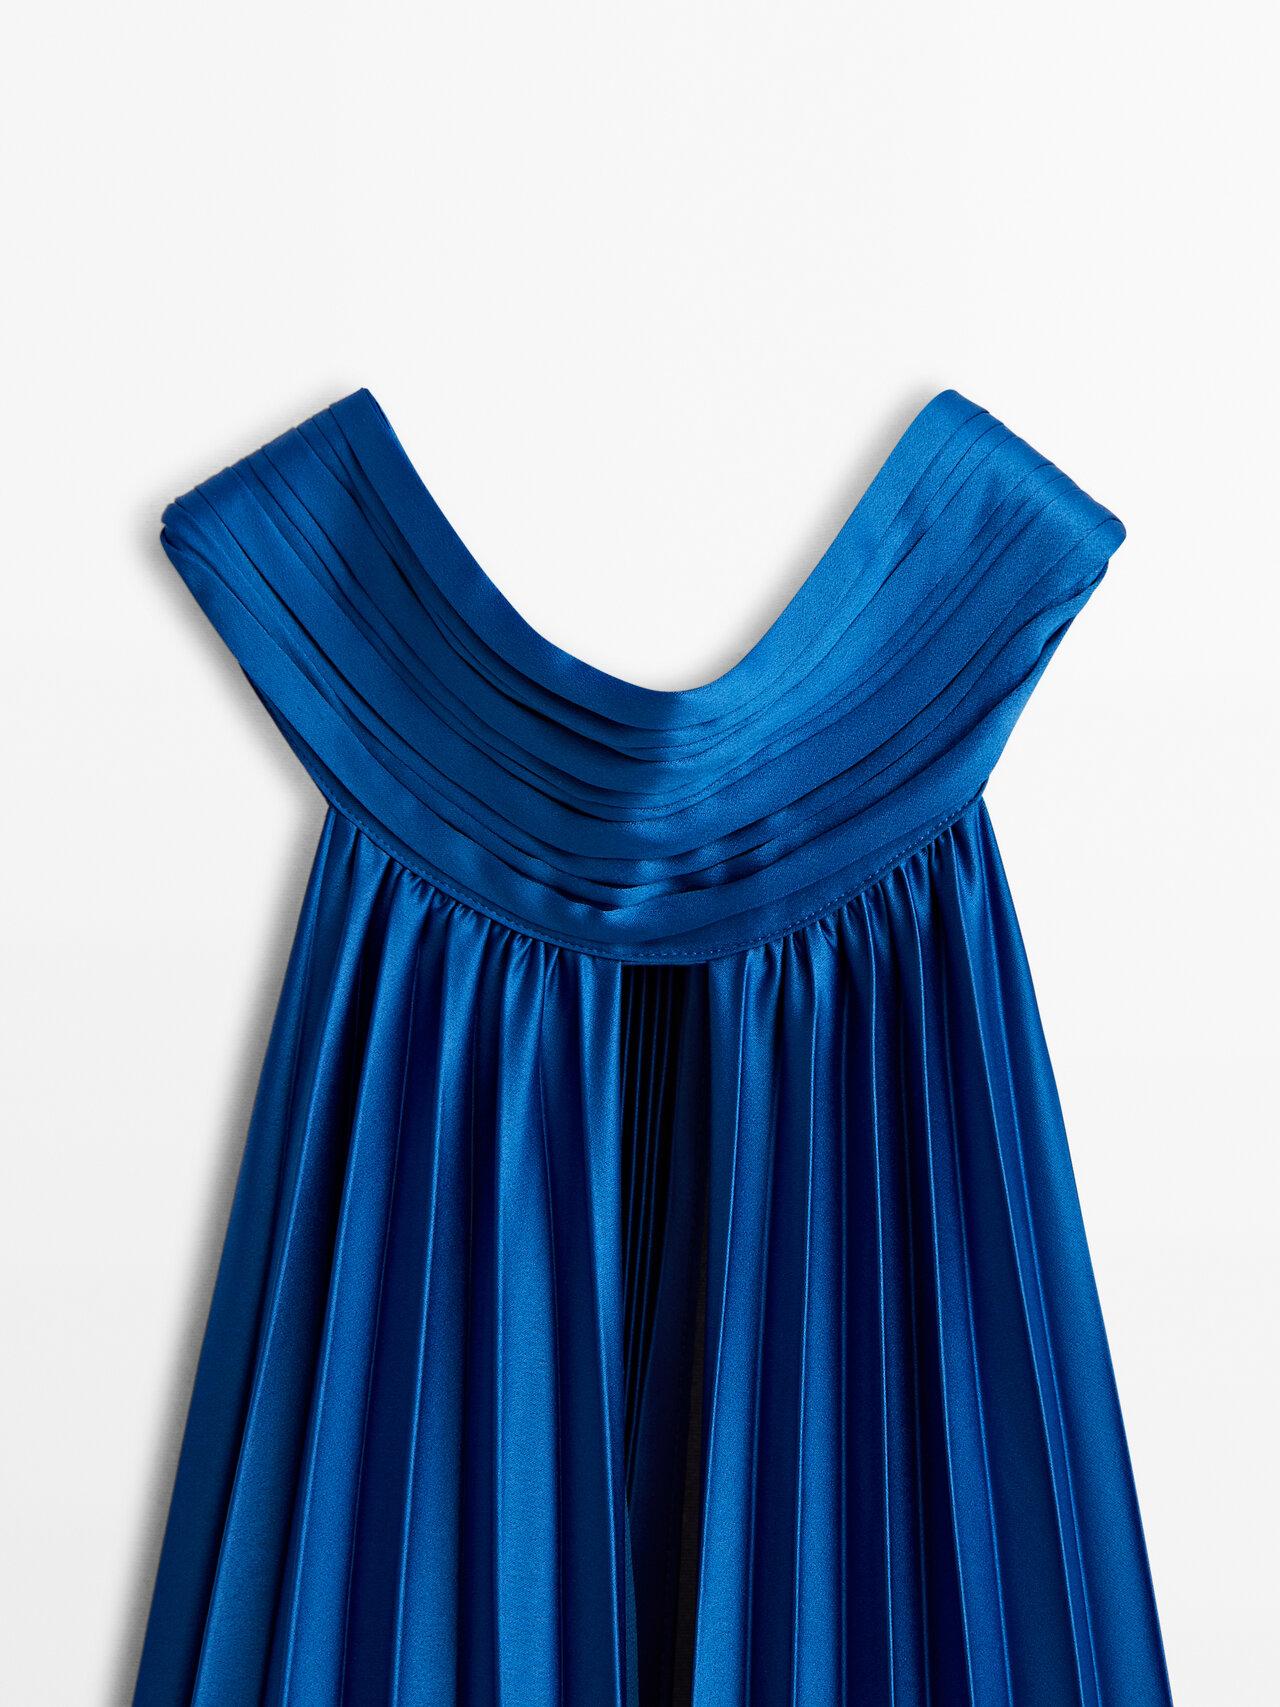 MASSIMO DUTTI Pleated Halter Jumpsuit With Tied Back - Studio in Blue | Lyst